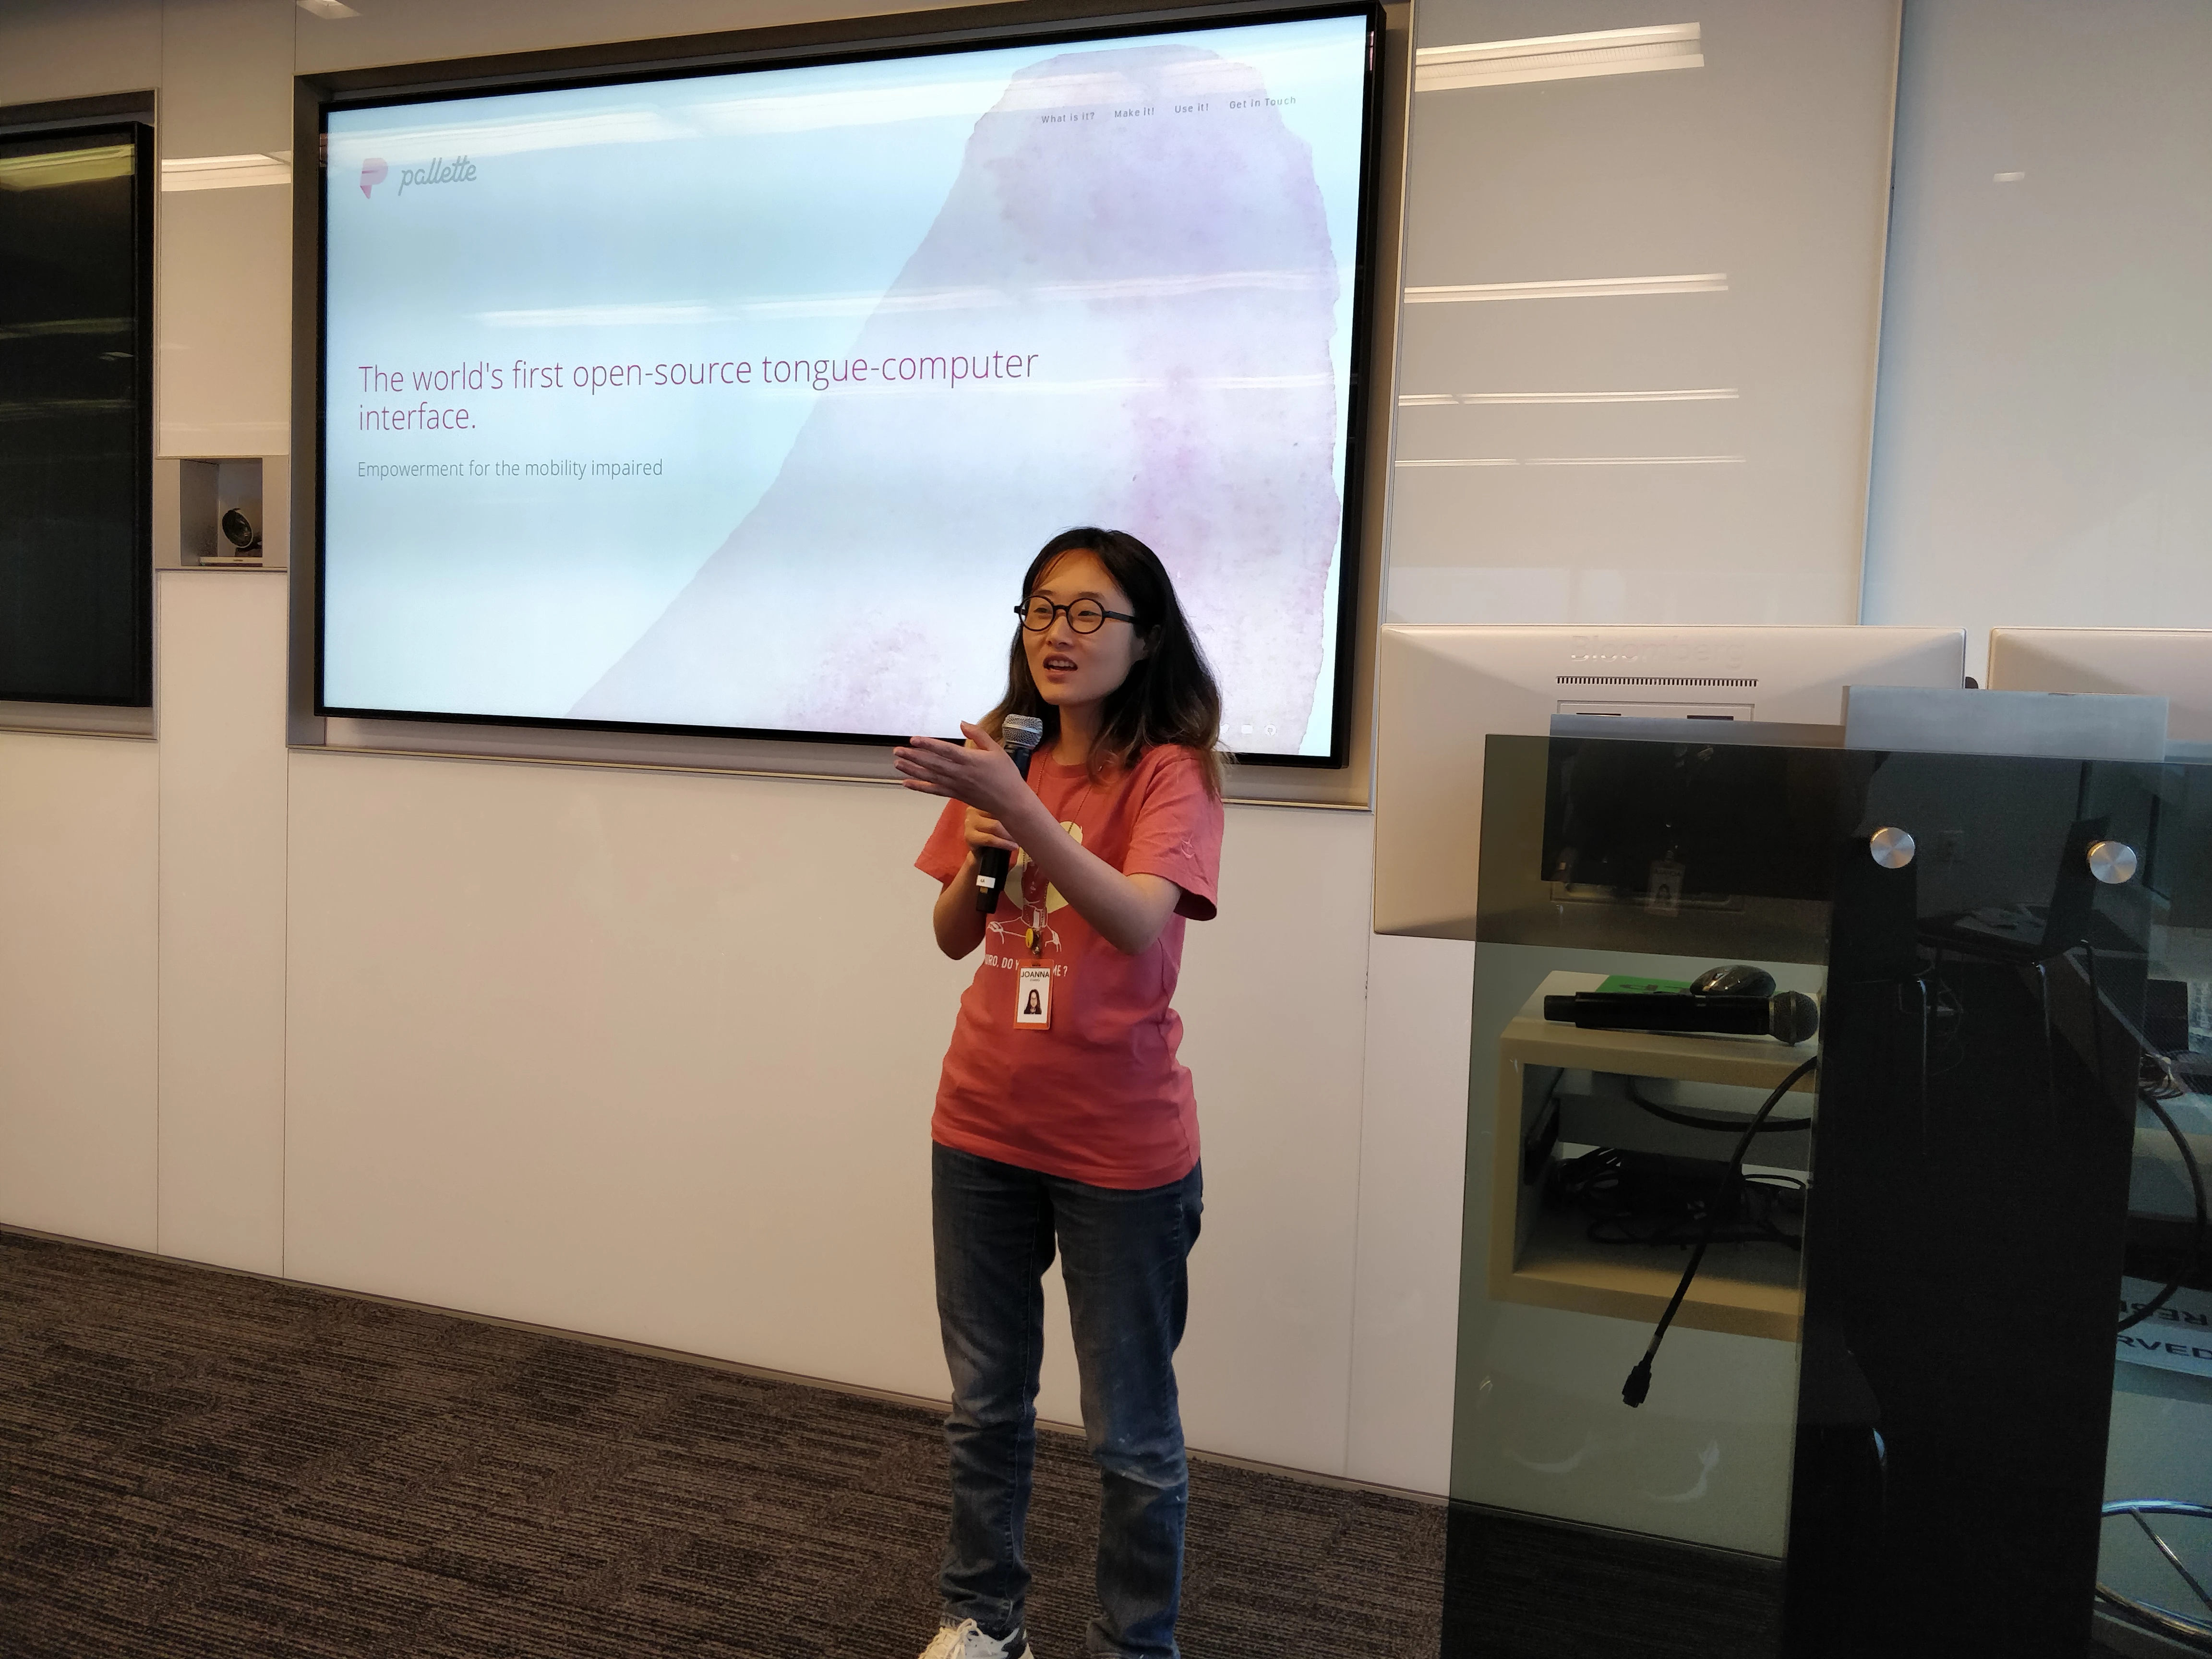 Joanna Zhang has been pursuing her passion project and developing Pallette, the world’s first open source tongue-computer interface.